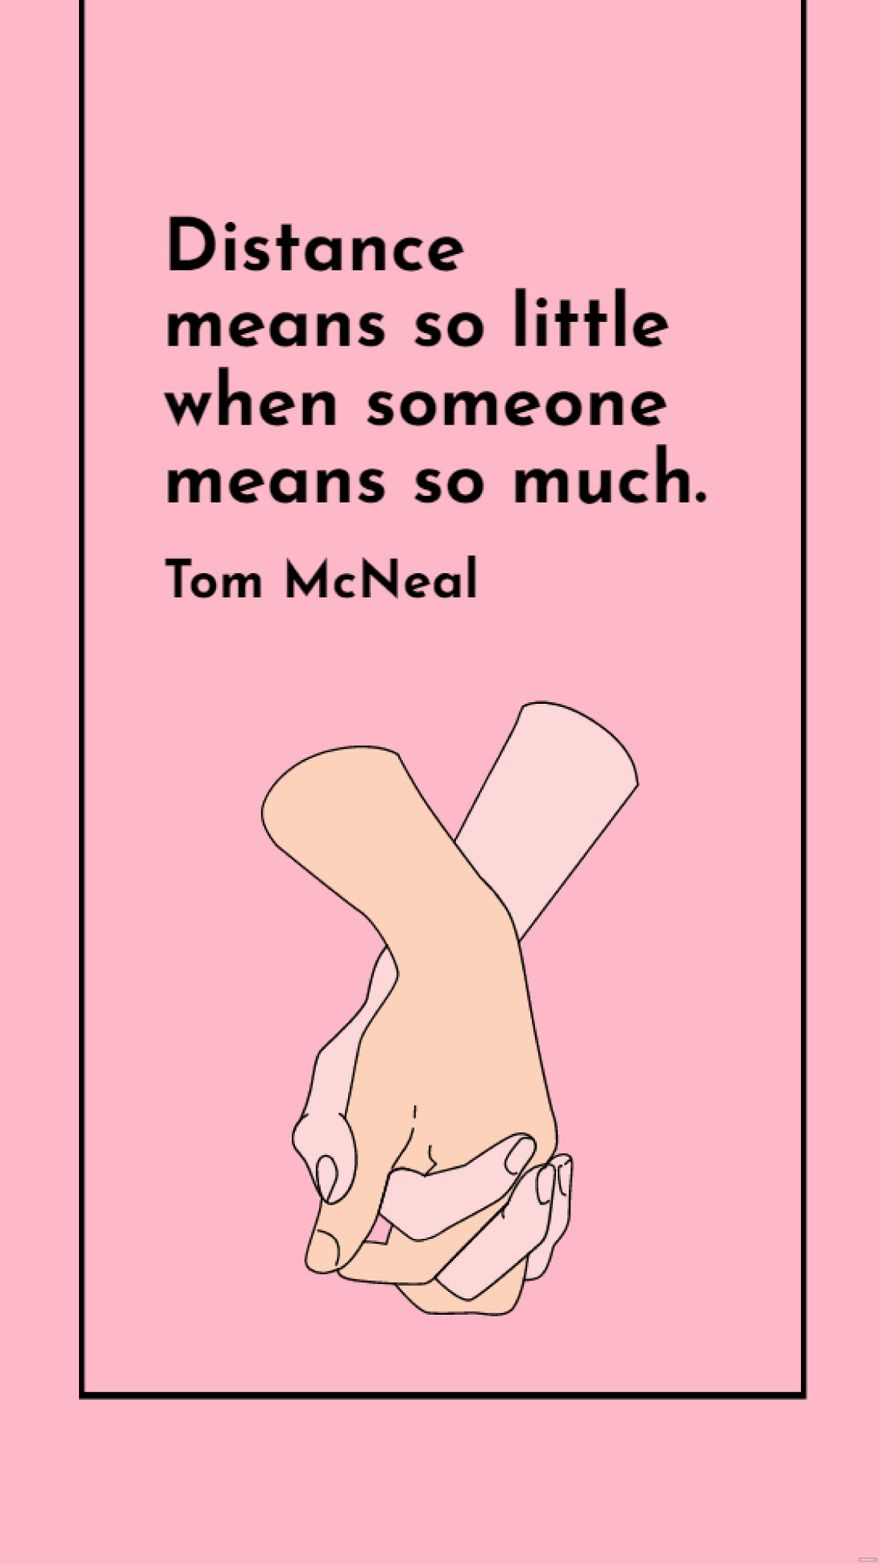 Tom McNeal - Distance means so little when someone means so much.